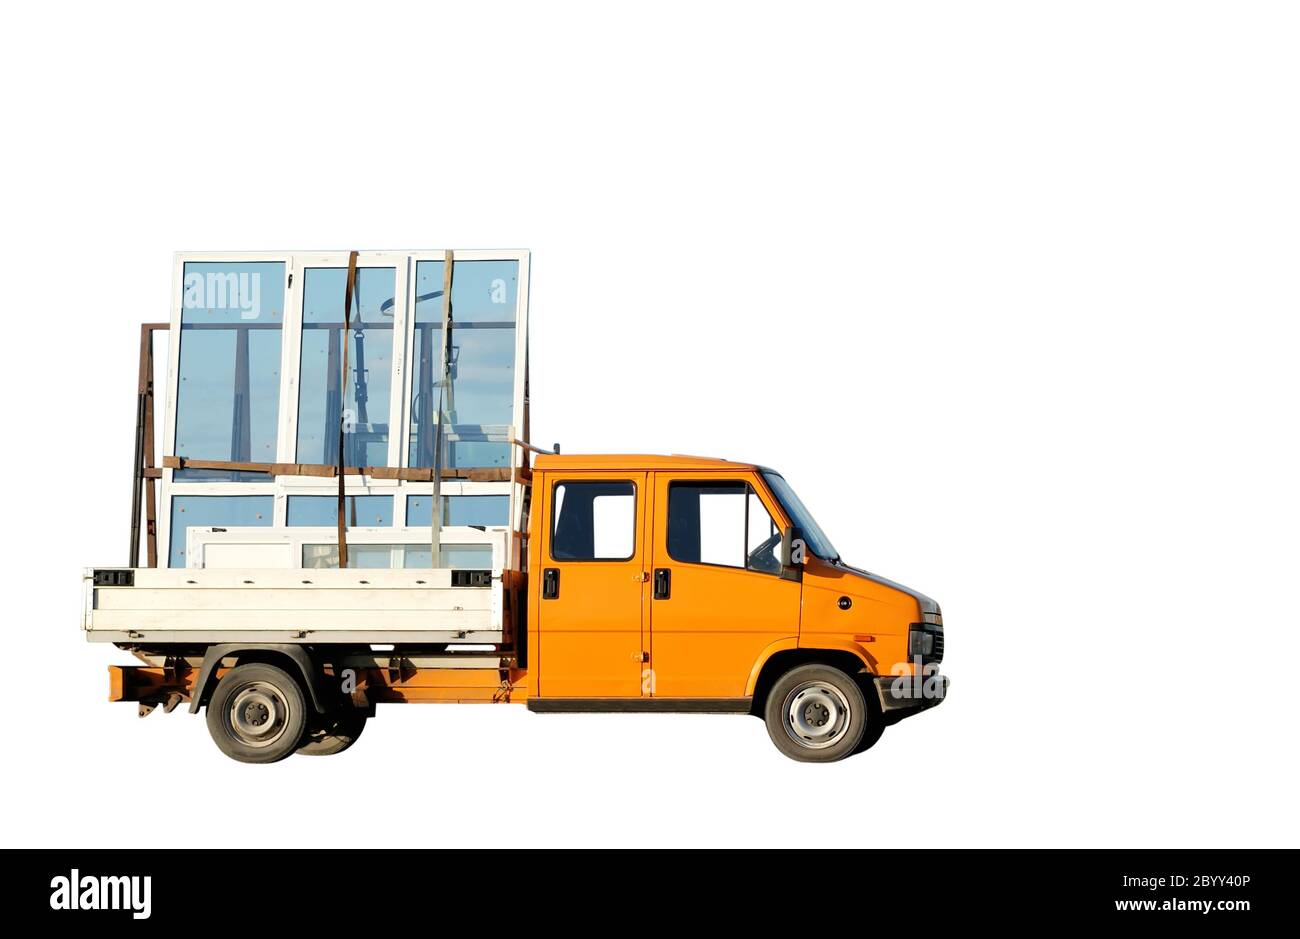 Truck delivering double-glazed winows Stock Photo